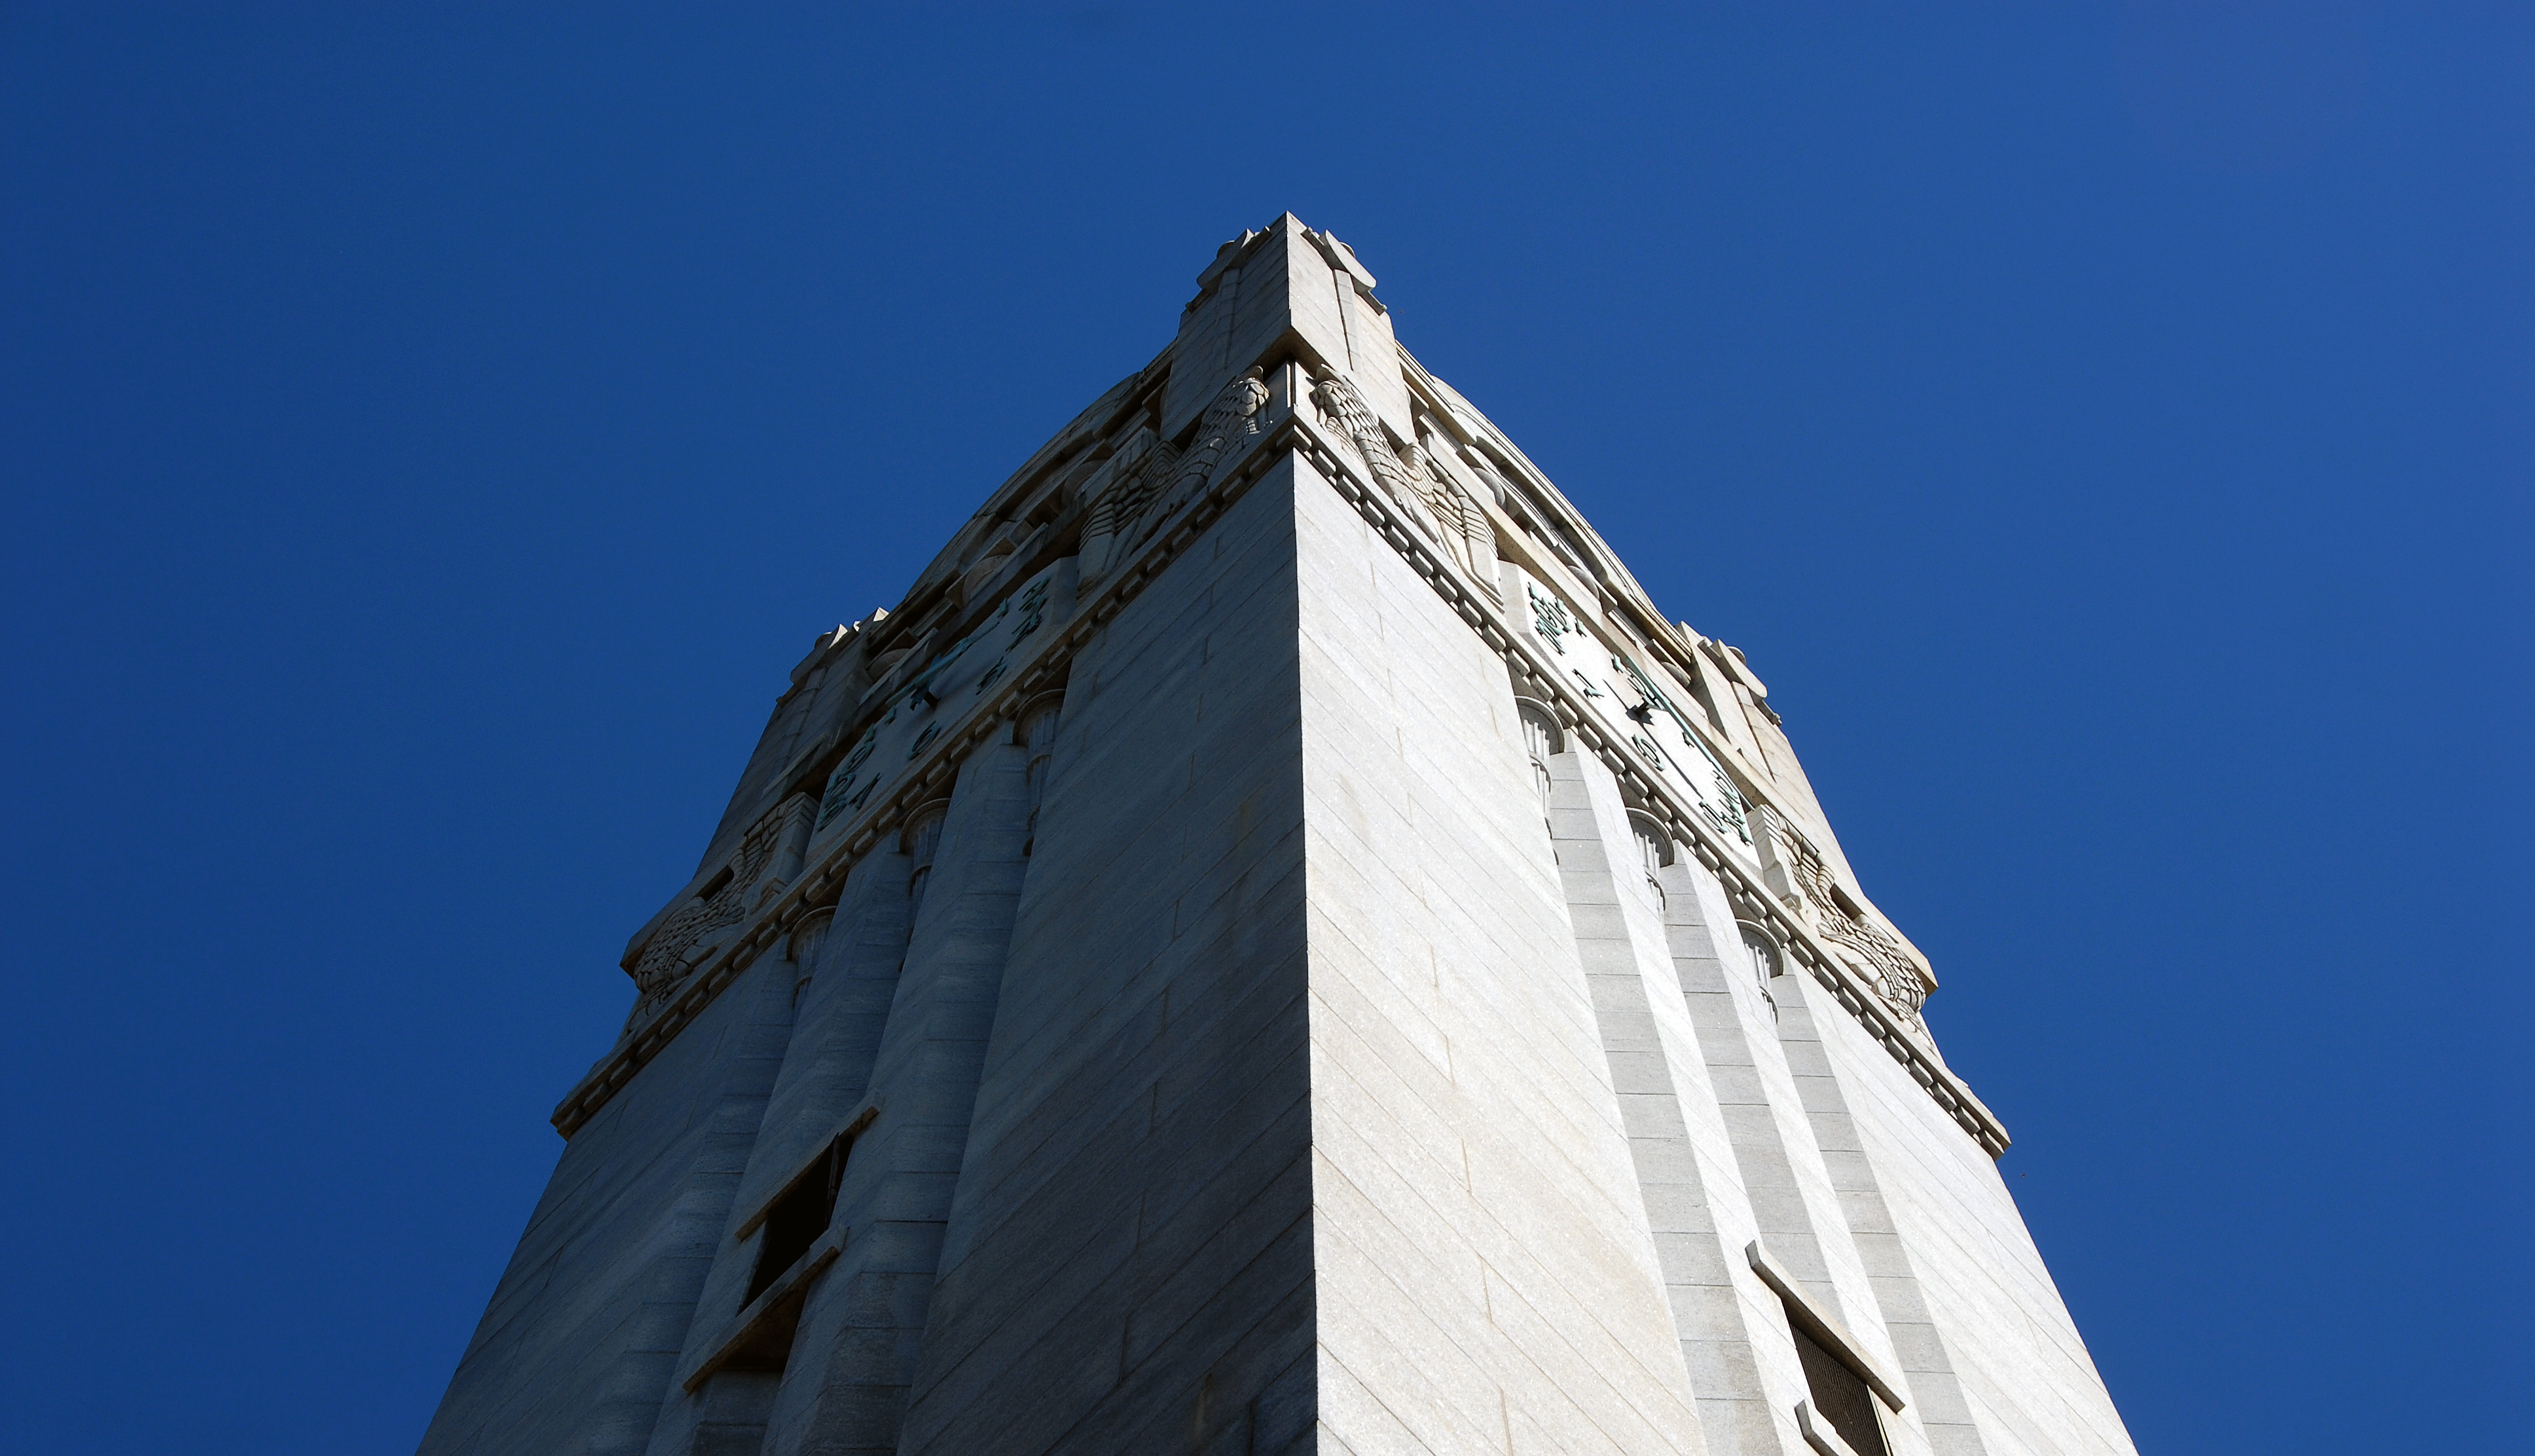 The Top of NC State's Bell-tower